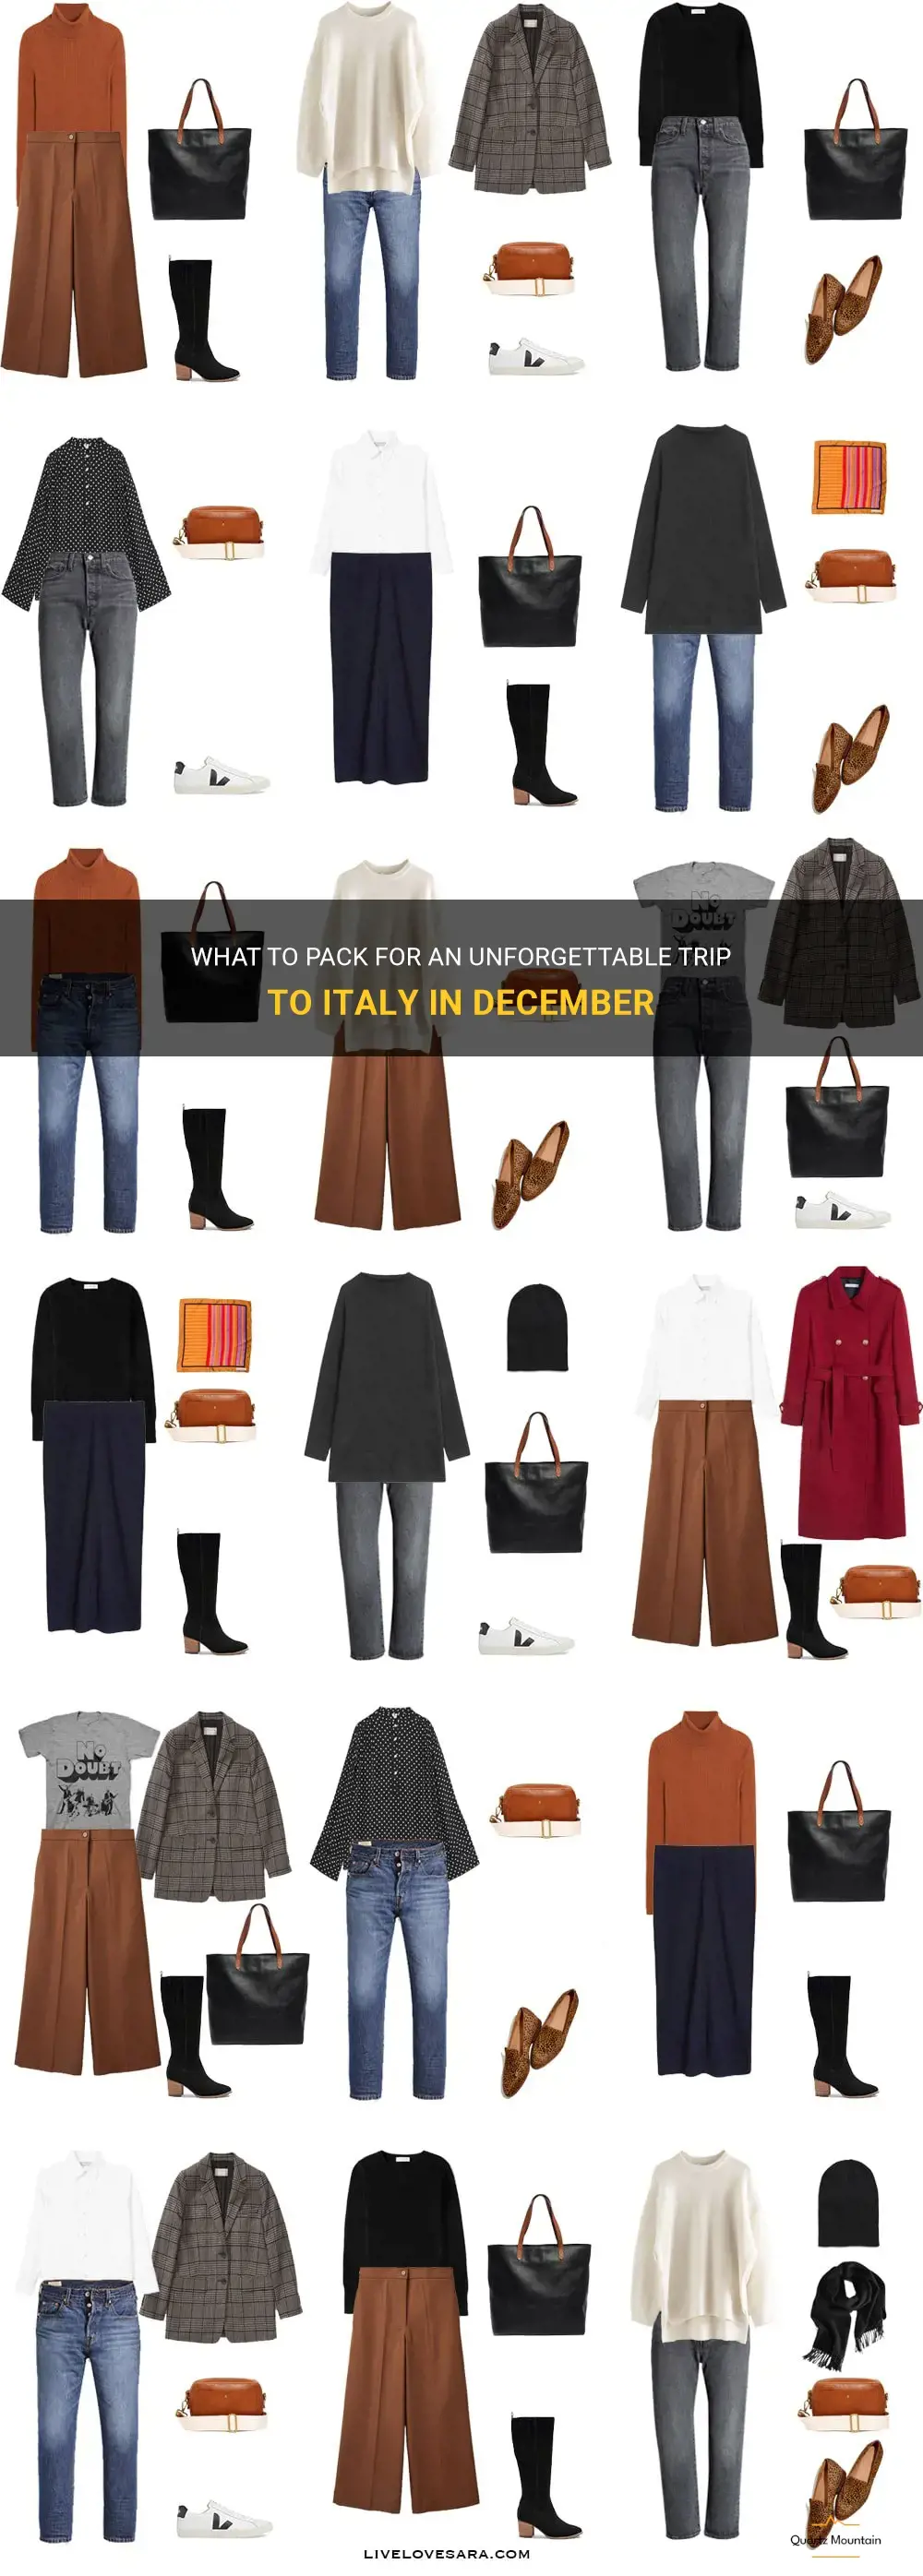 what to pack for a trip to italy in december